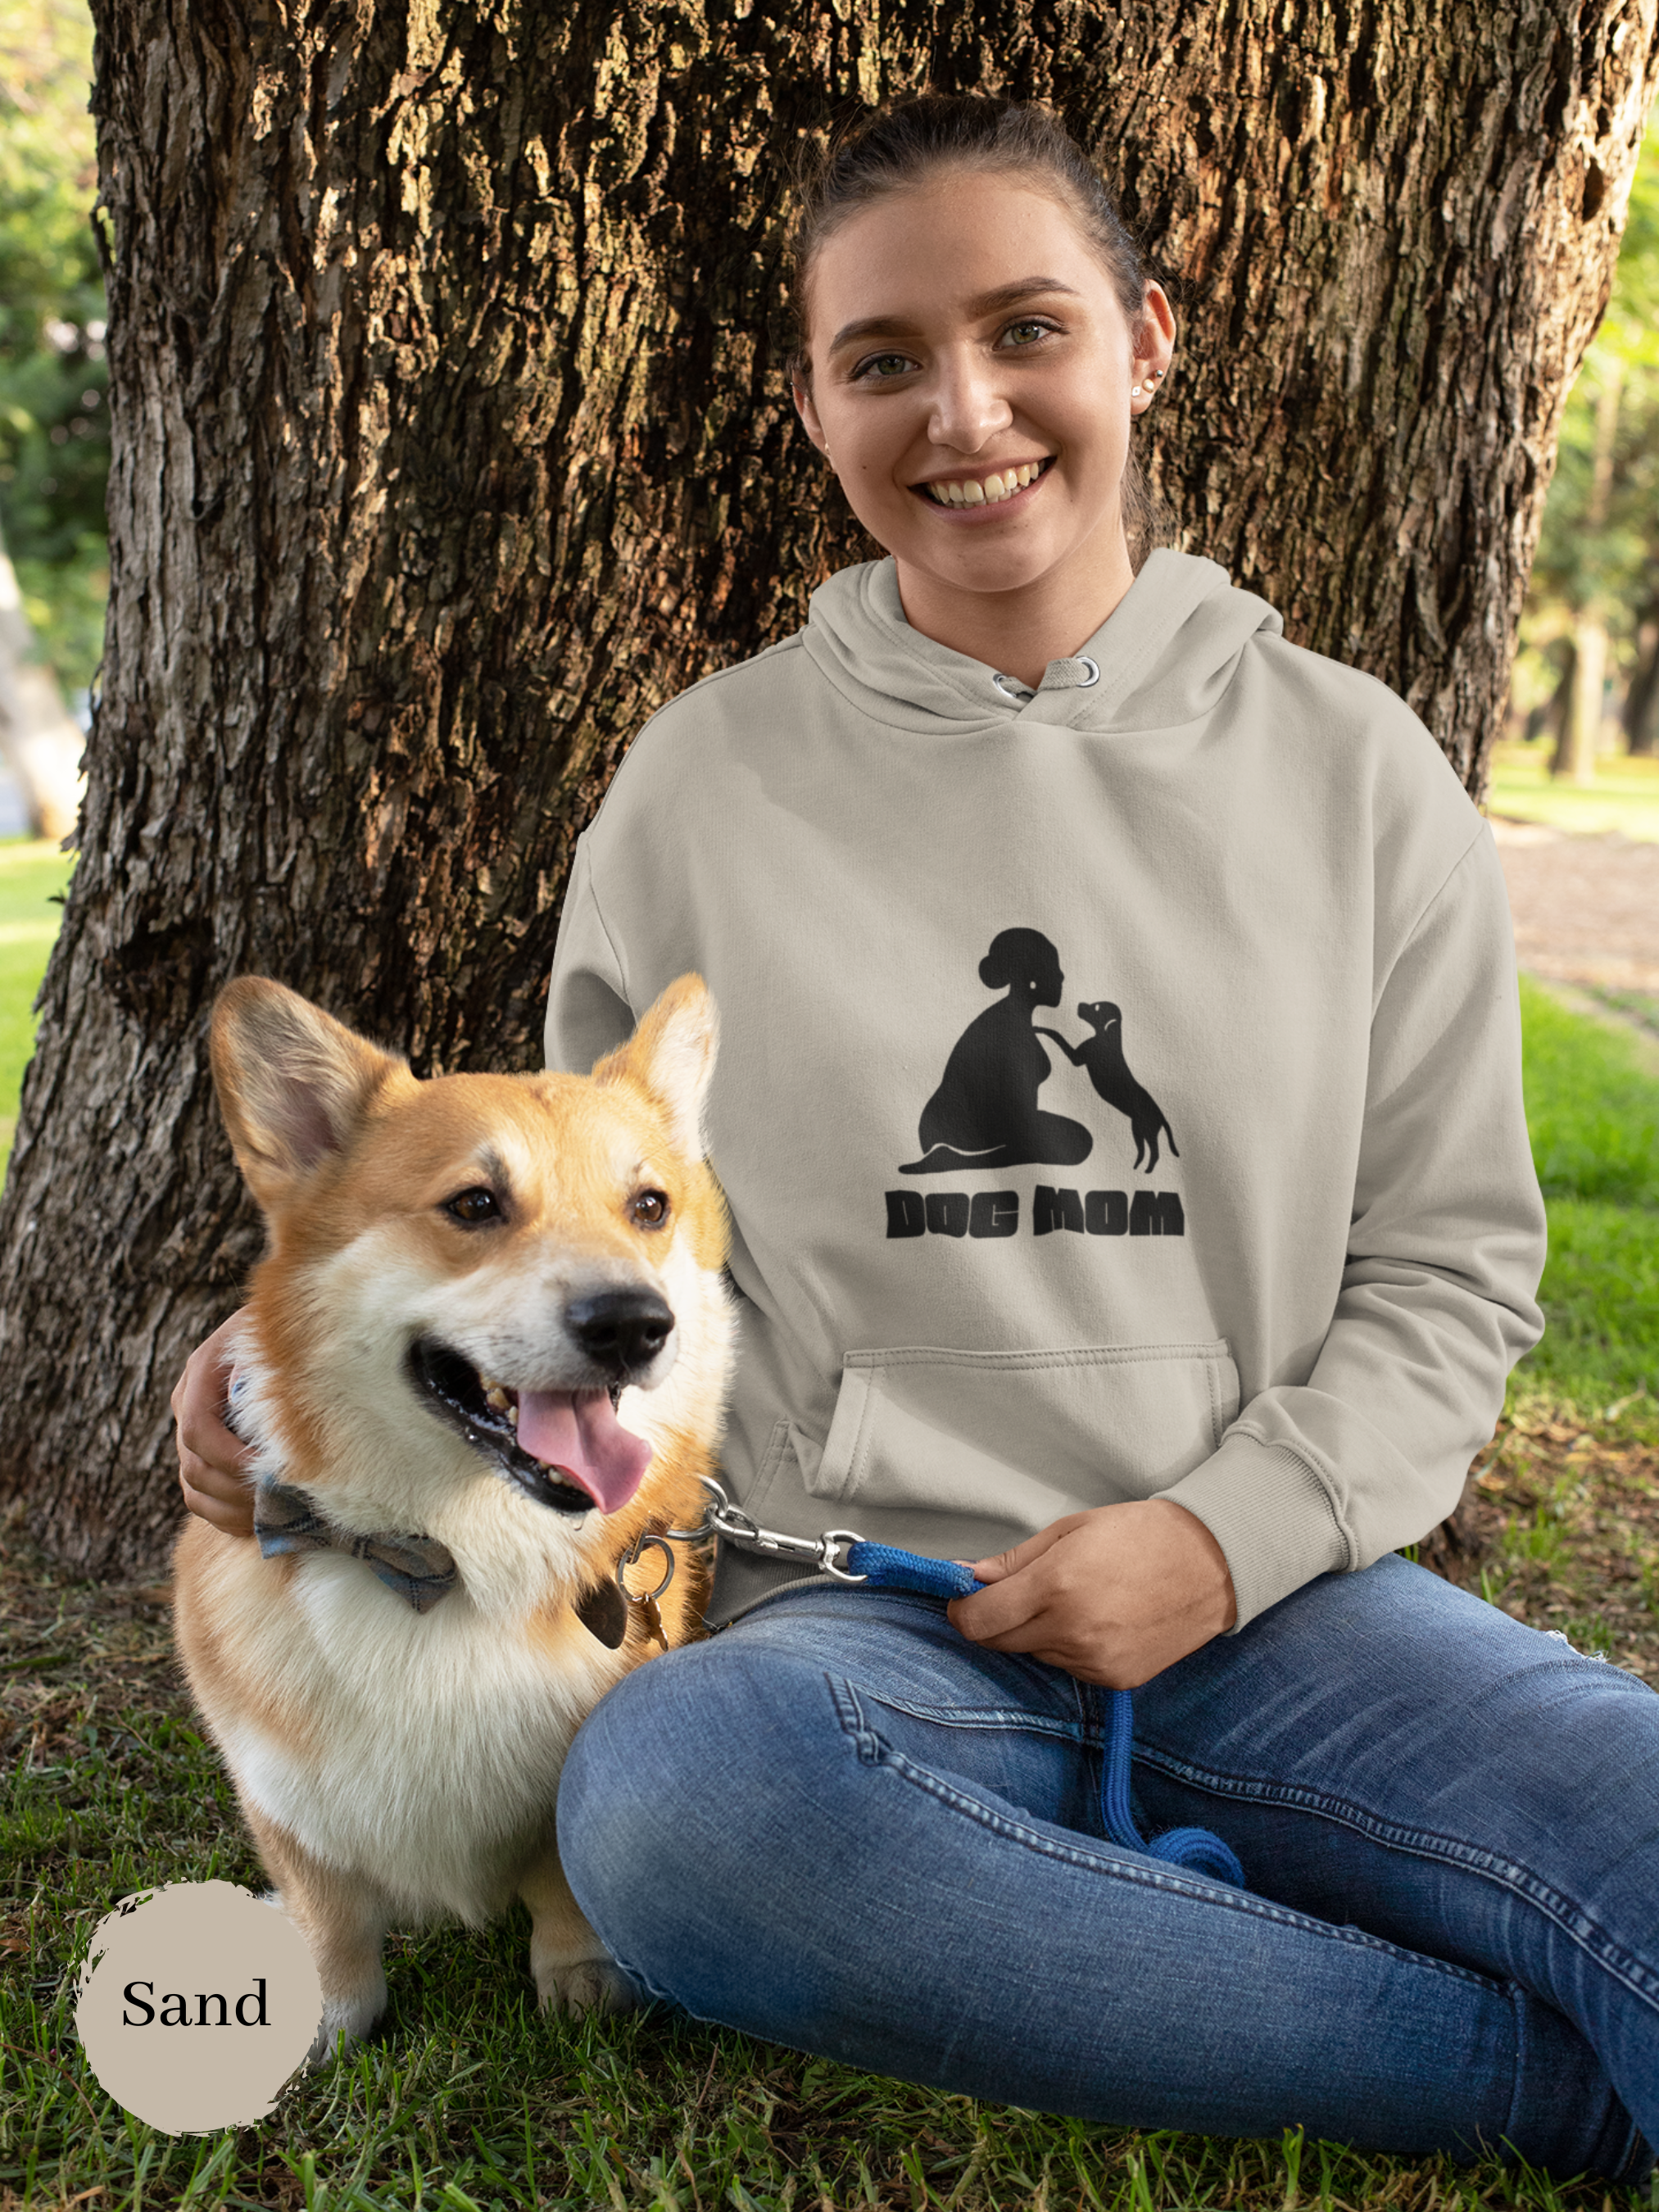 Dog Mom Hoodie: Cute Dog Mom Life Apparel and Cozy Gift for Dog Owners